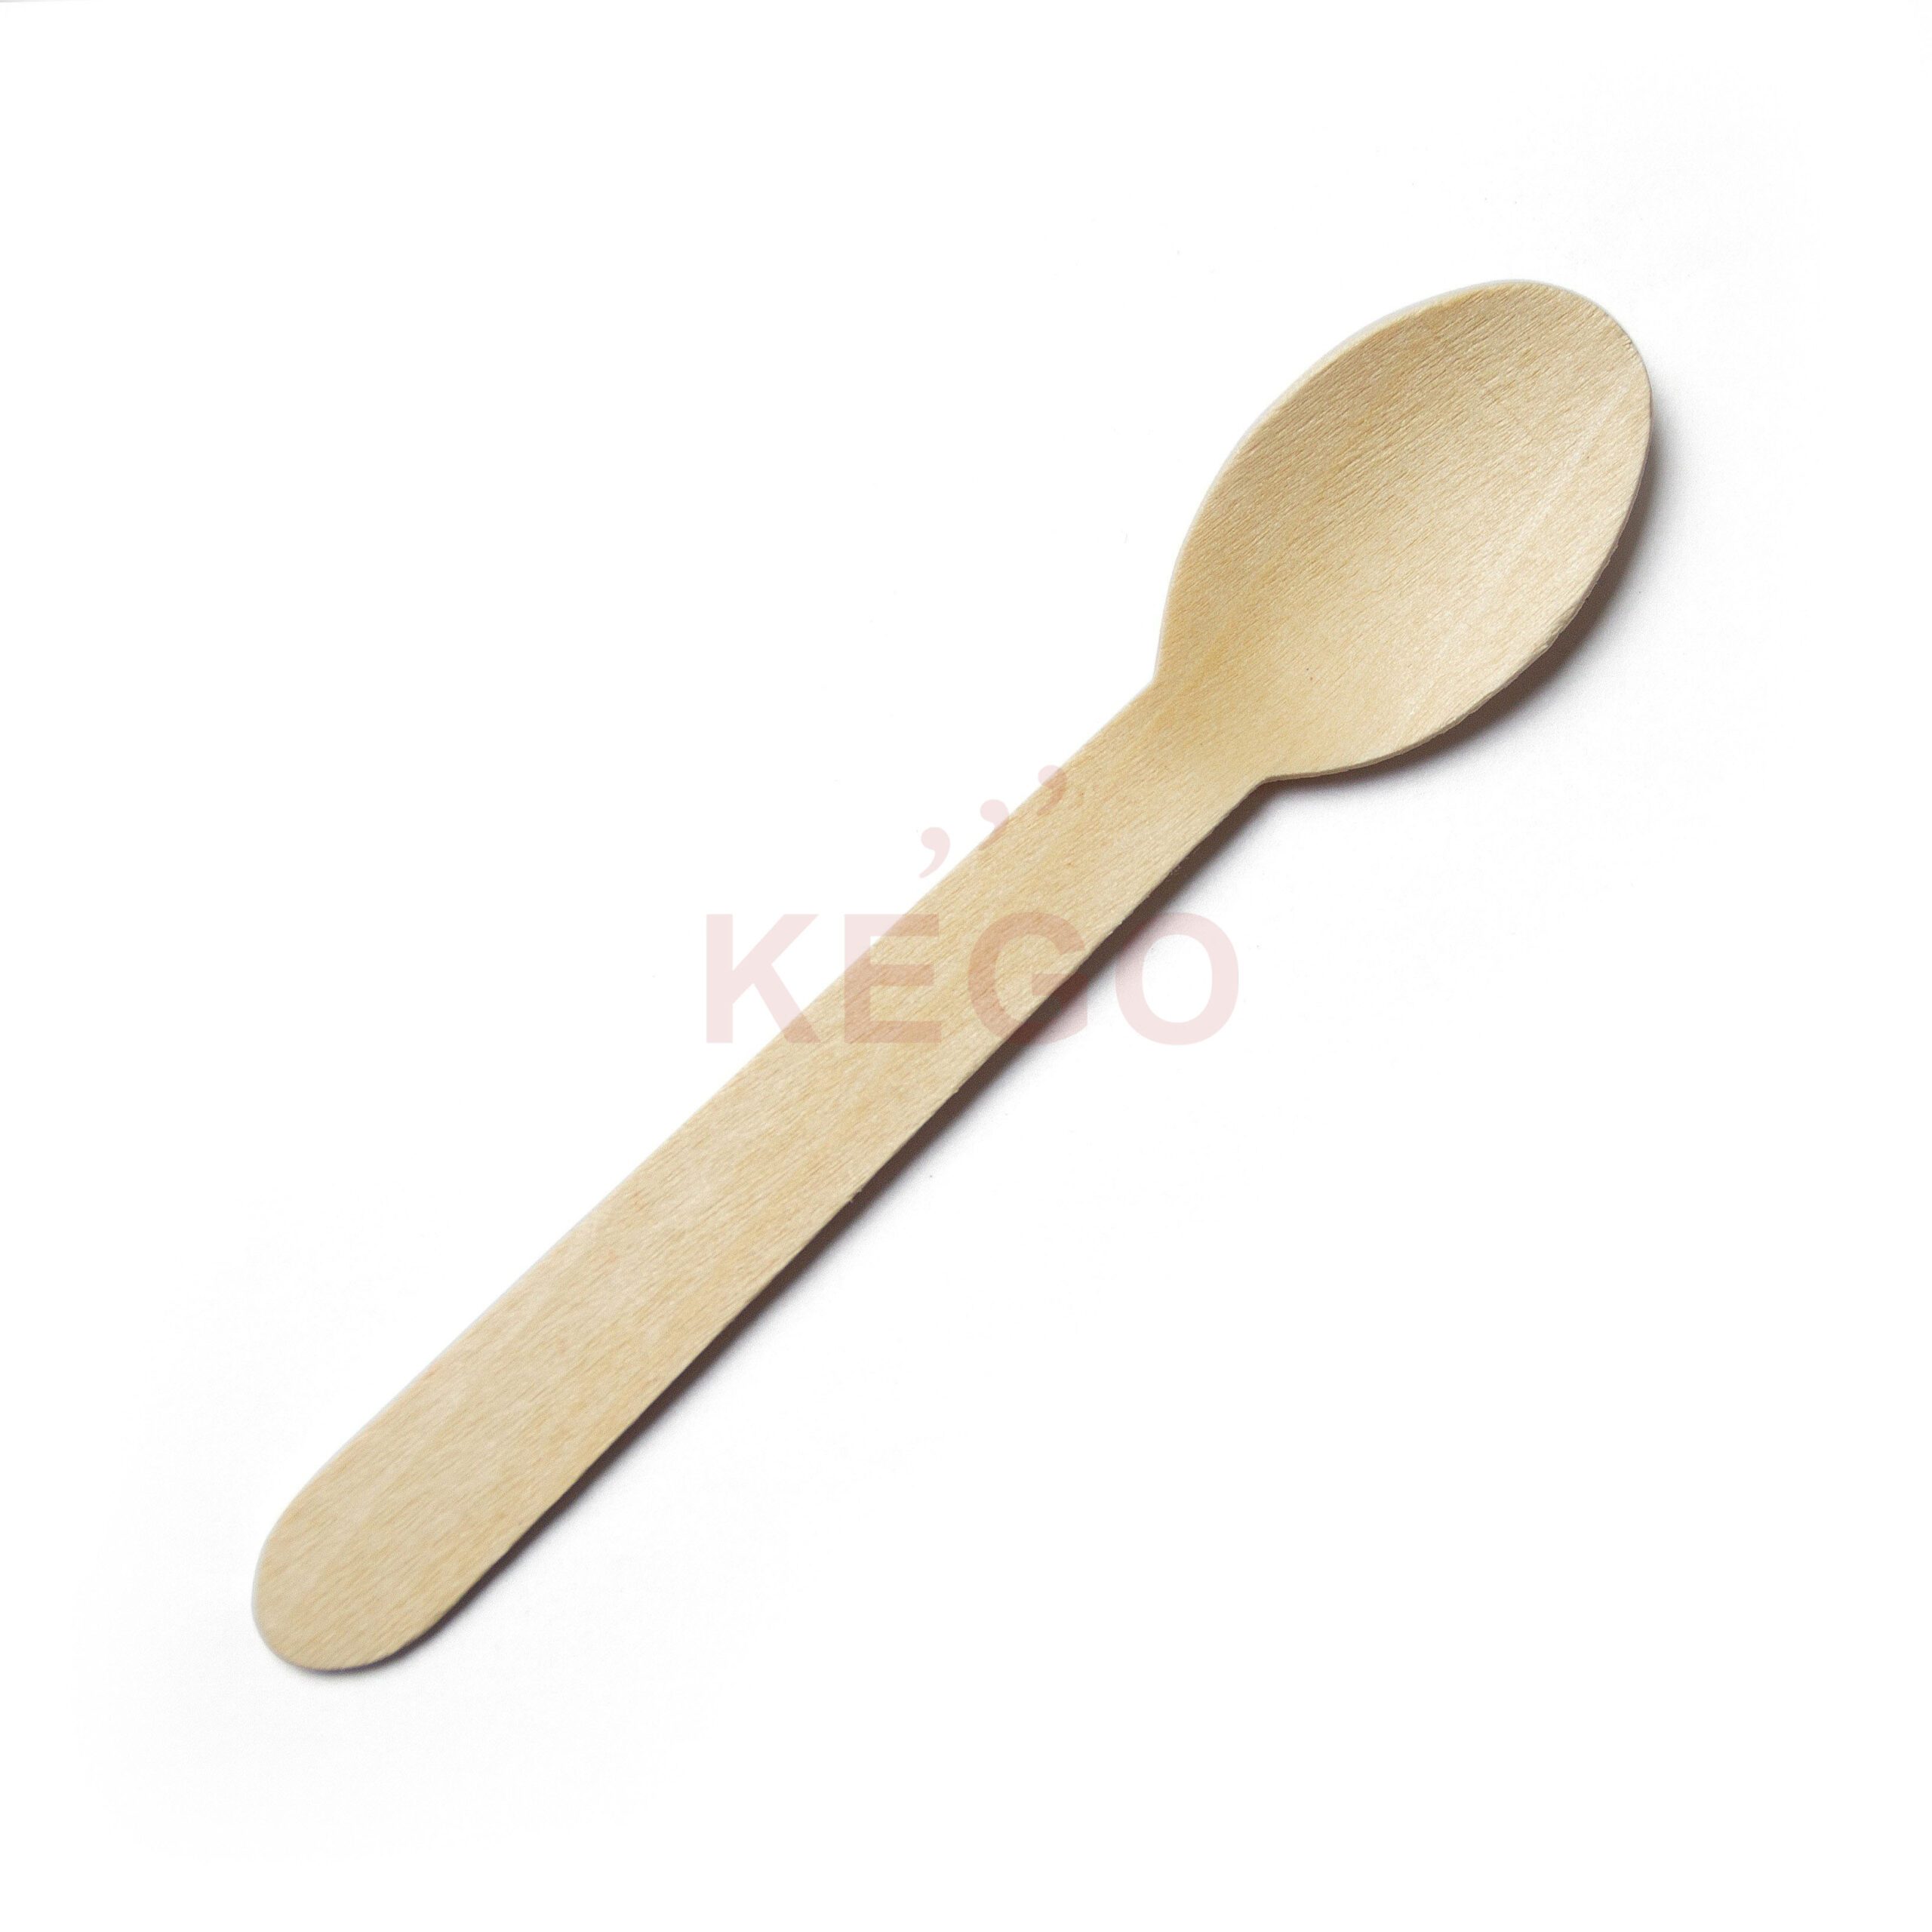 https://kego.vn/wp-content/uploads/2015/09/Disposable-Wooden-Spoon-160-3-scaled.jpg